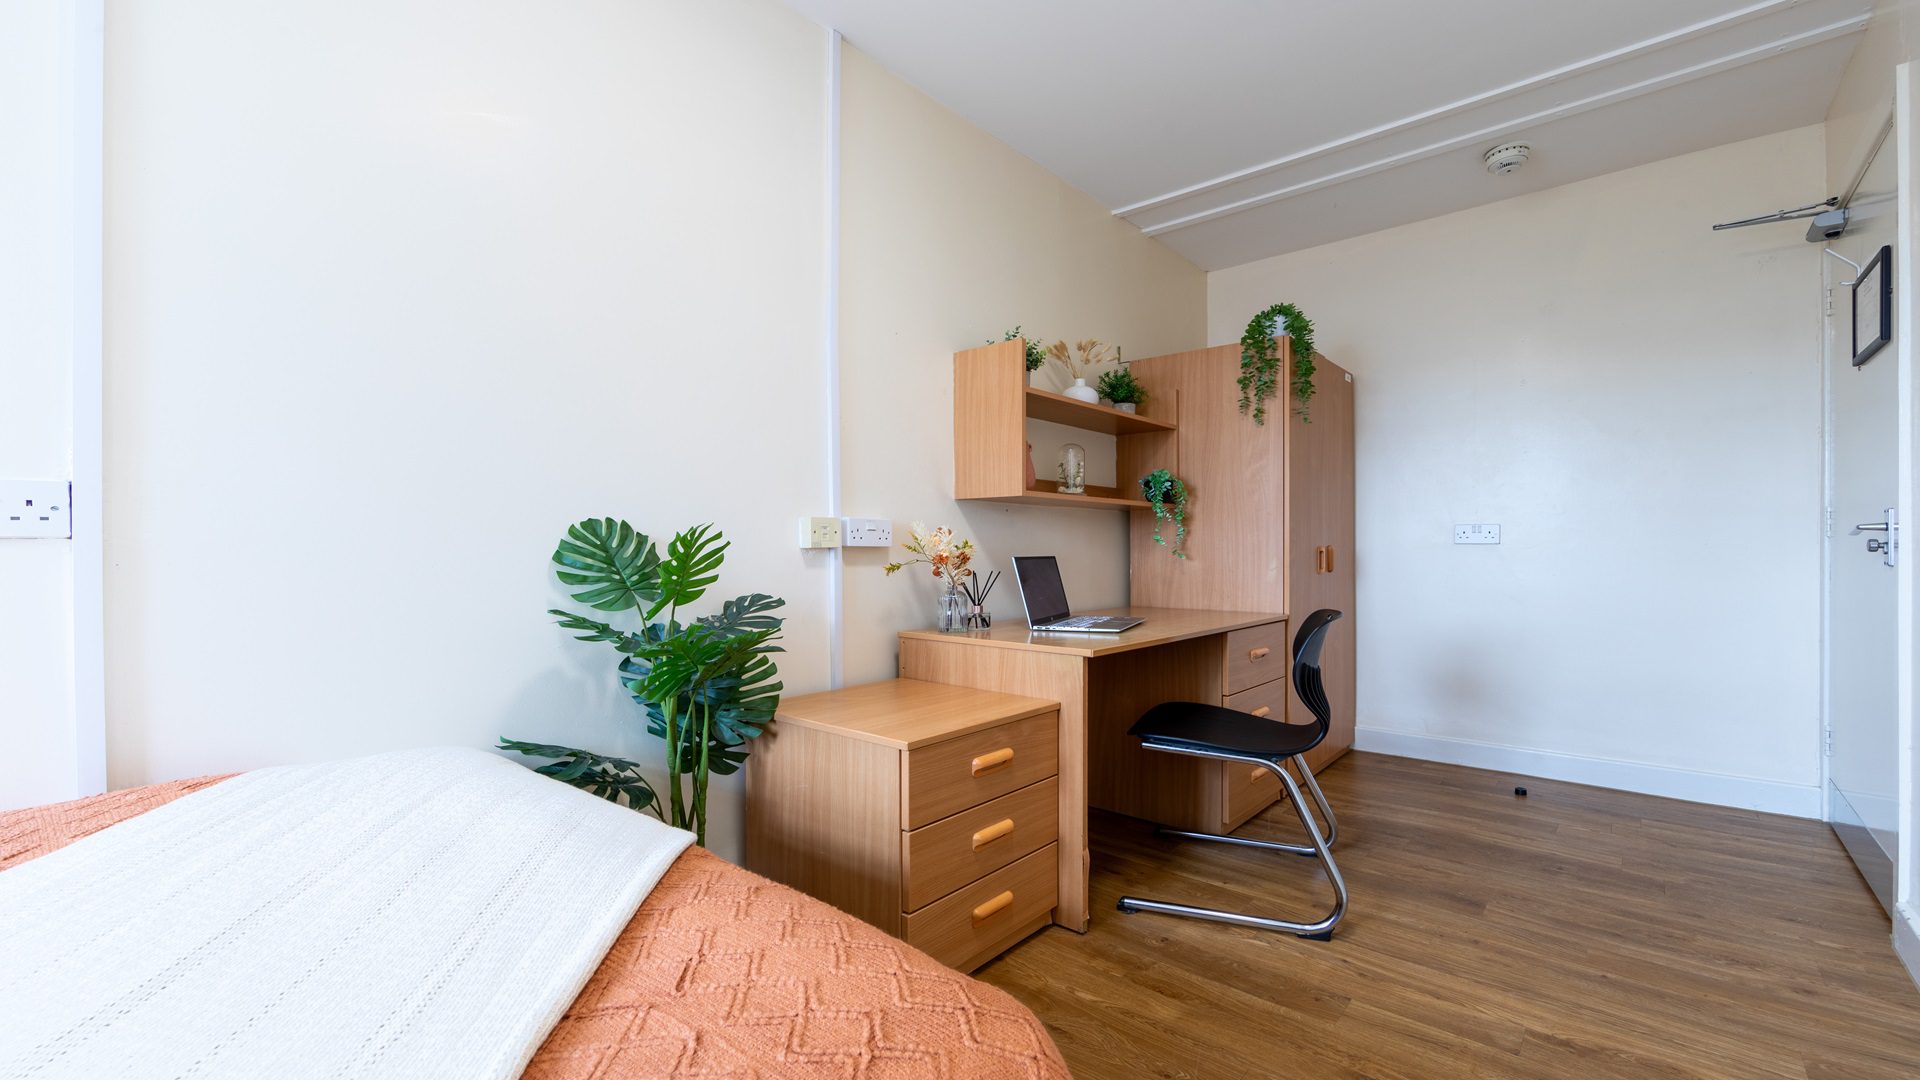 Can A Non-Student Live In Student Housing